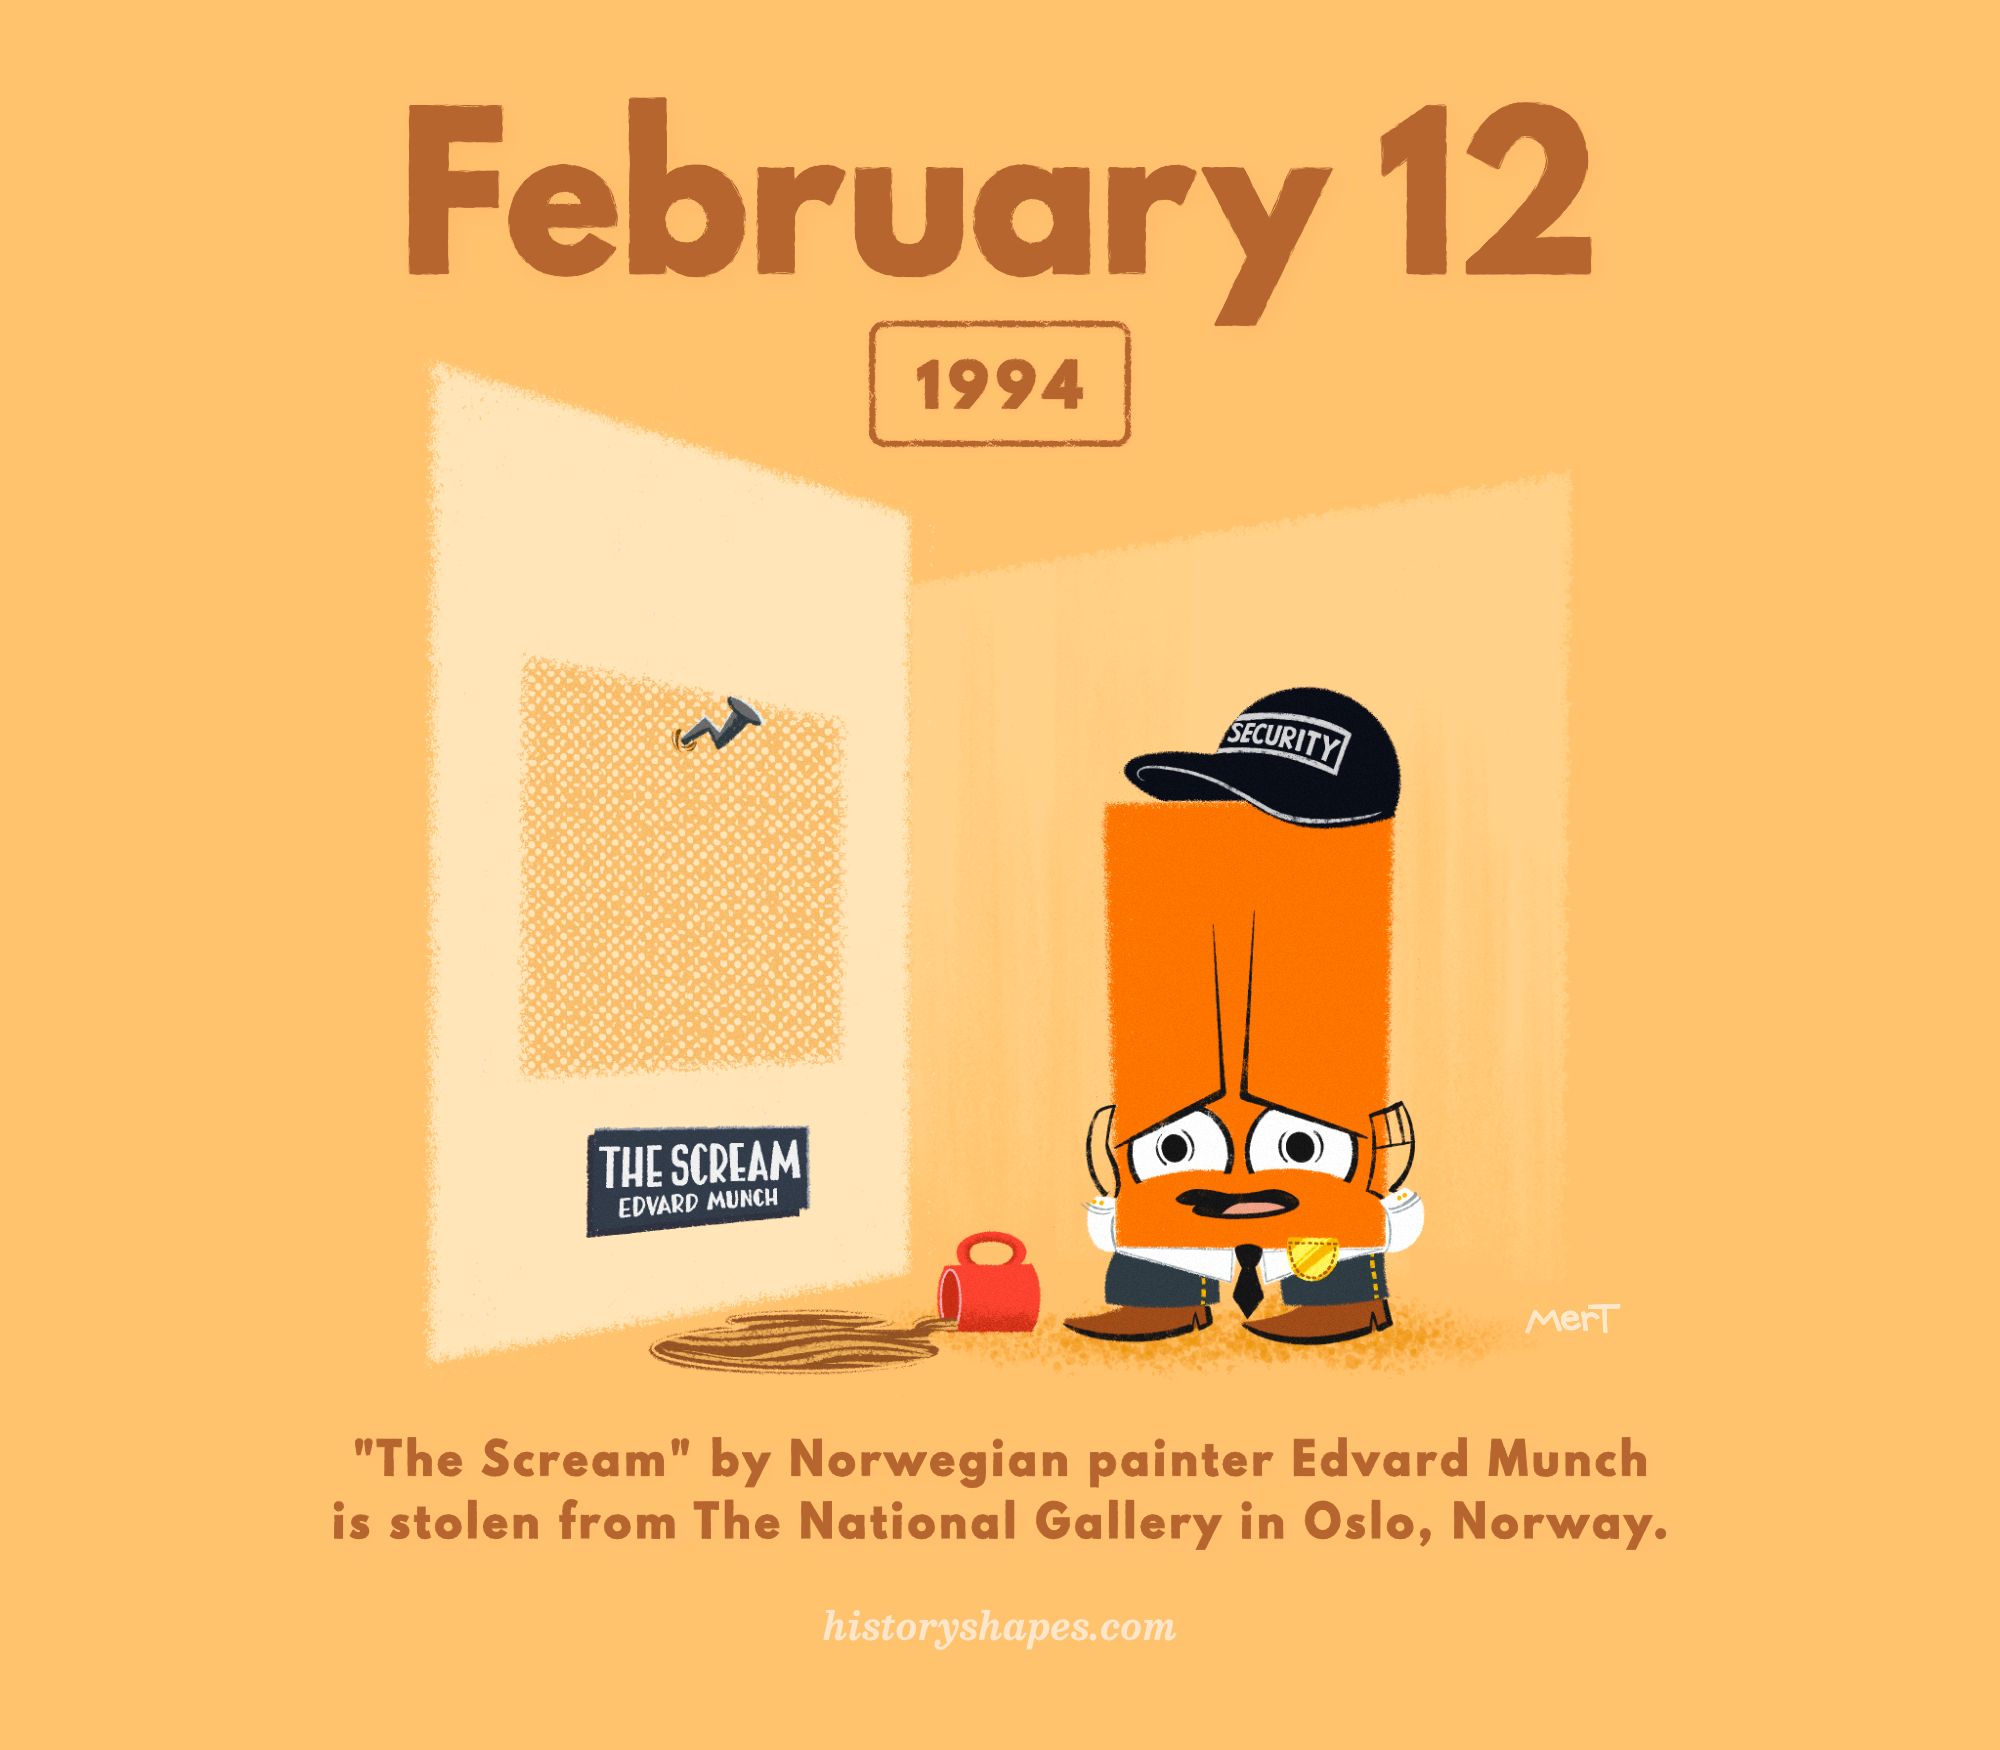 Robbie, an orange rectangle, is an upset security guard with a face like "The Scream," by Edvard Munch. The artwork is missing from the museum wall behind him.